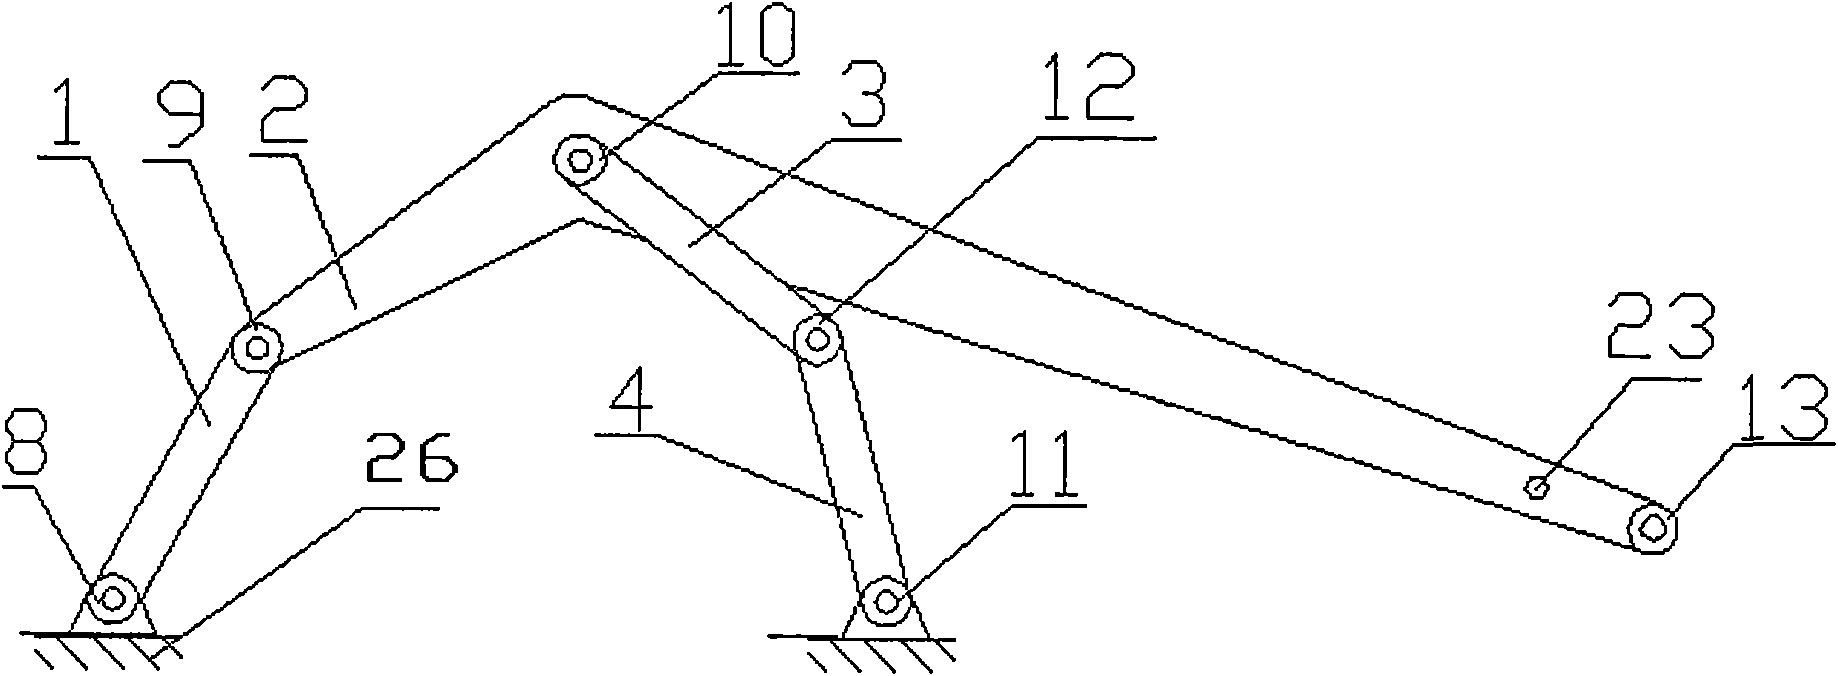 Excavating mechanism of controllable planar three degree of freedom